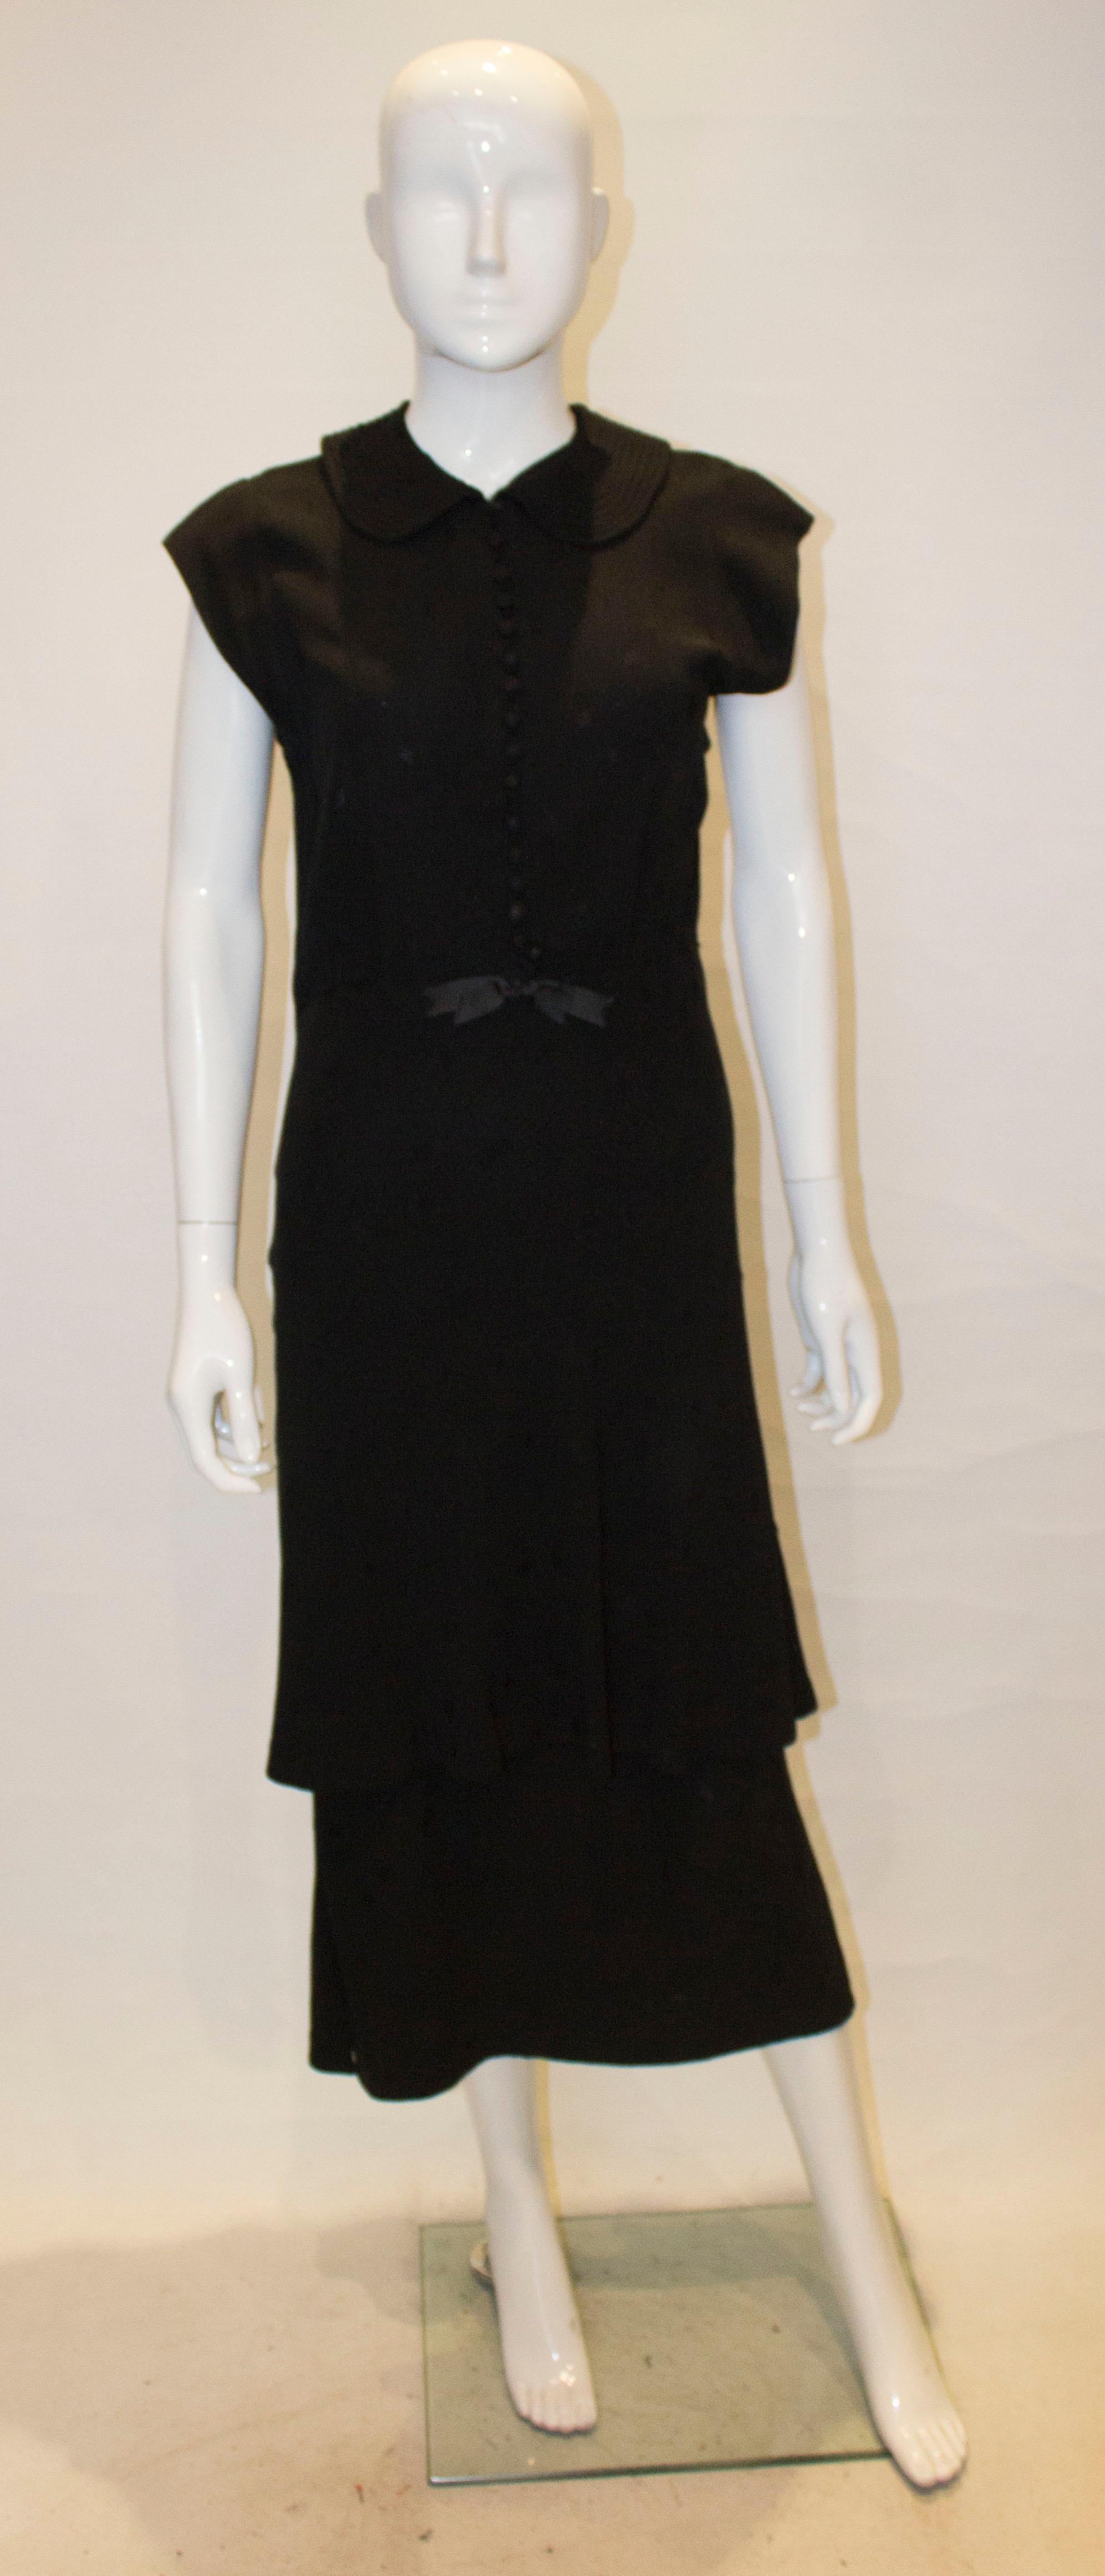 A chic vintage cocktail dress with a layered skirt and cap sleaves. The dress opens with fabric covered buttons at the front , and has an attractive stitched collar.